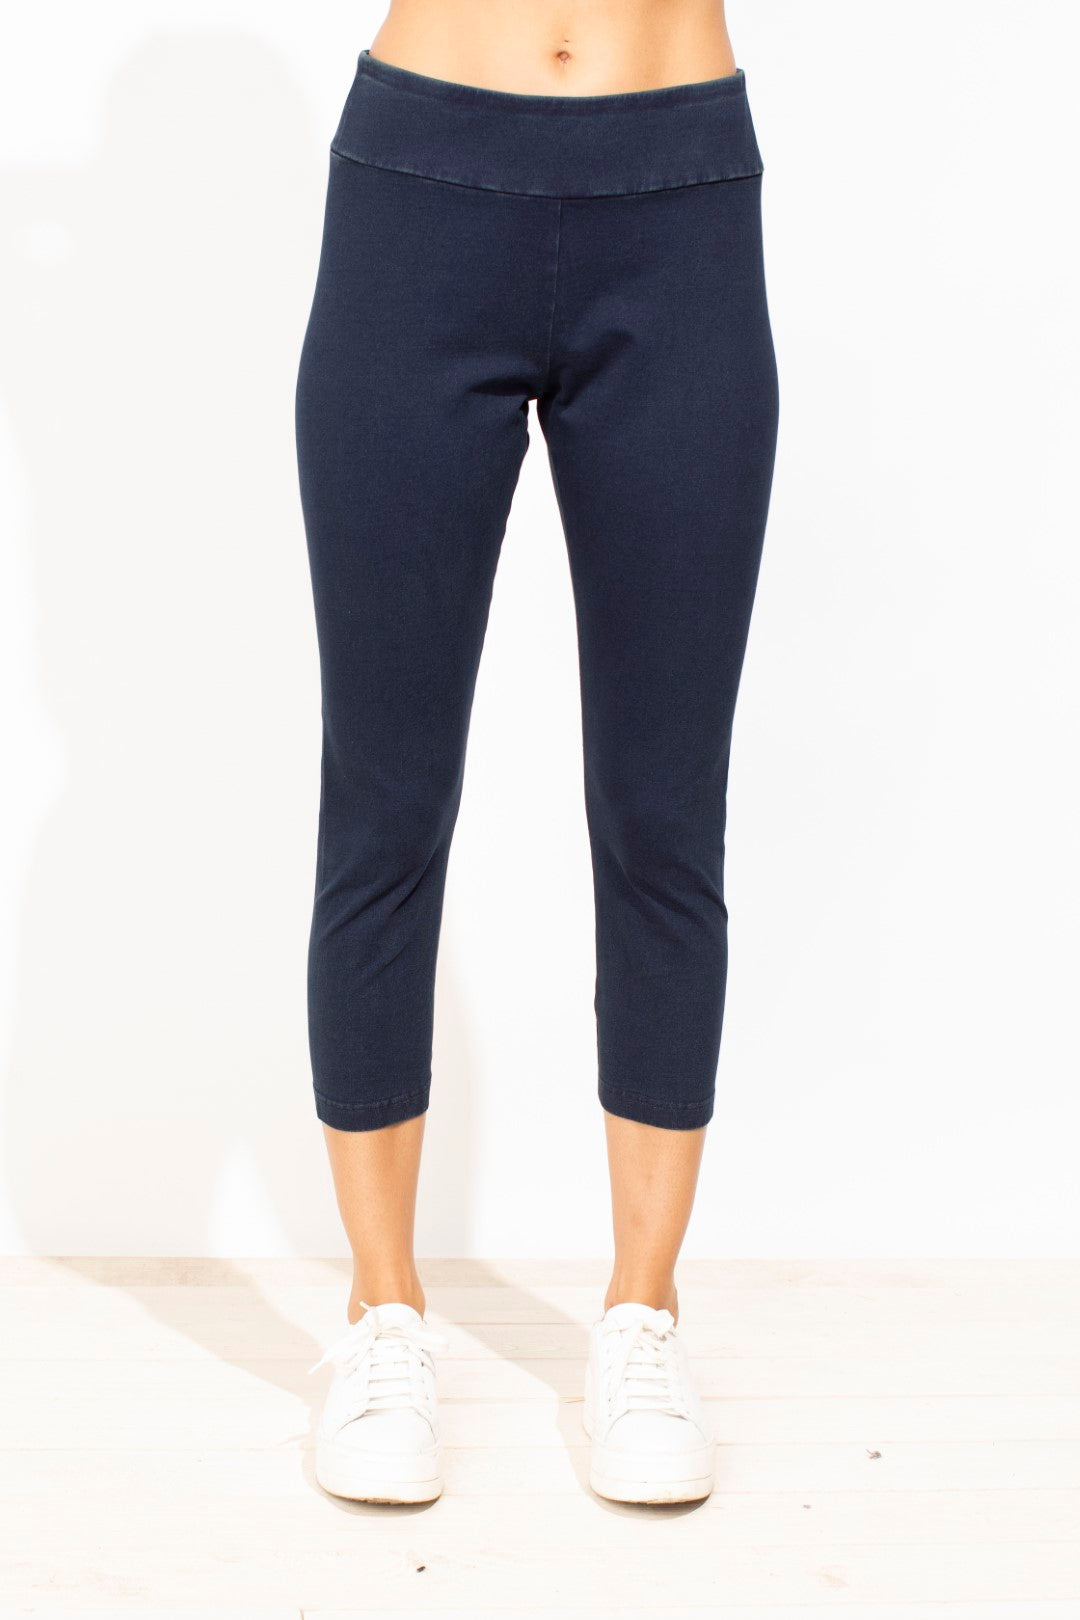 Women's Cropped/Capri Pants and Jeans